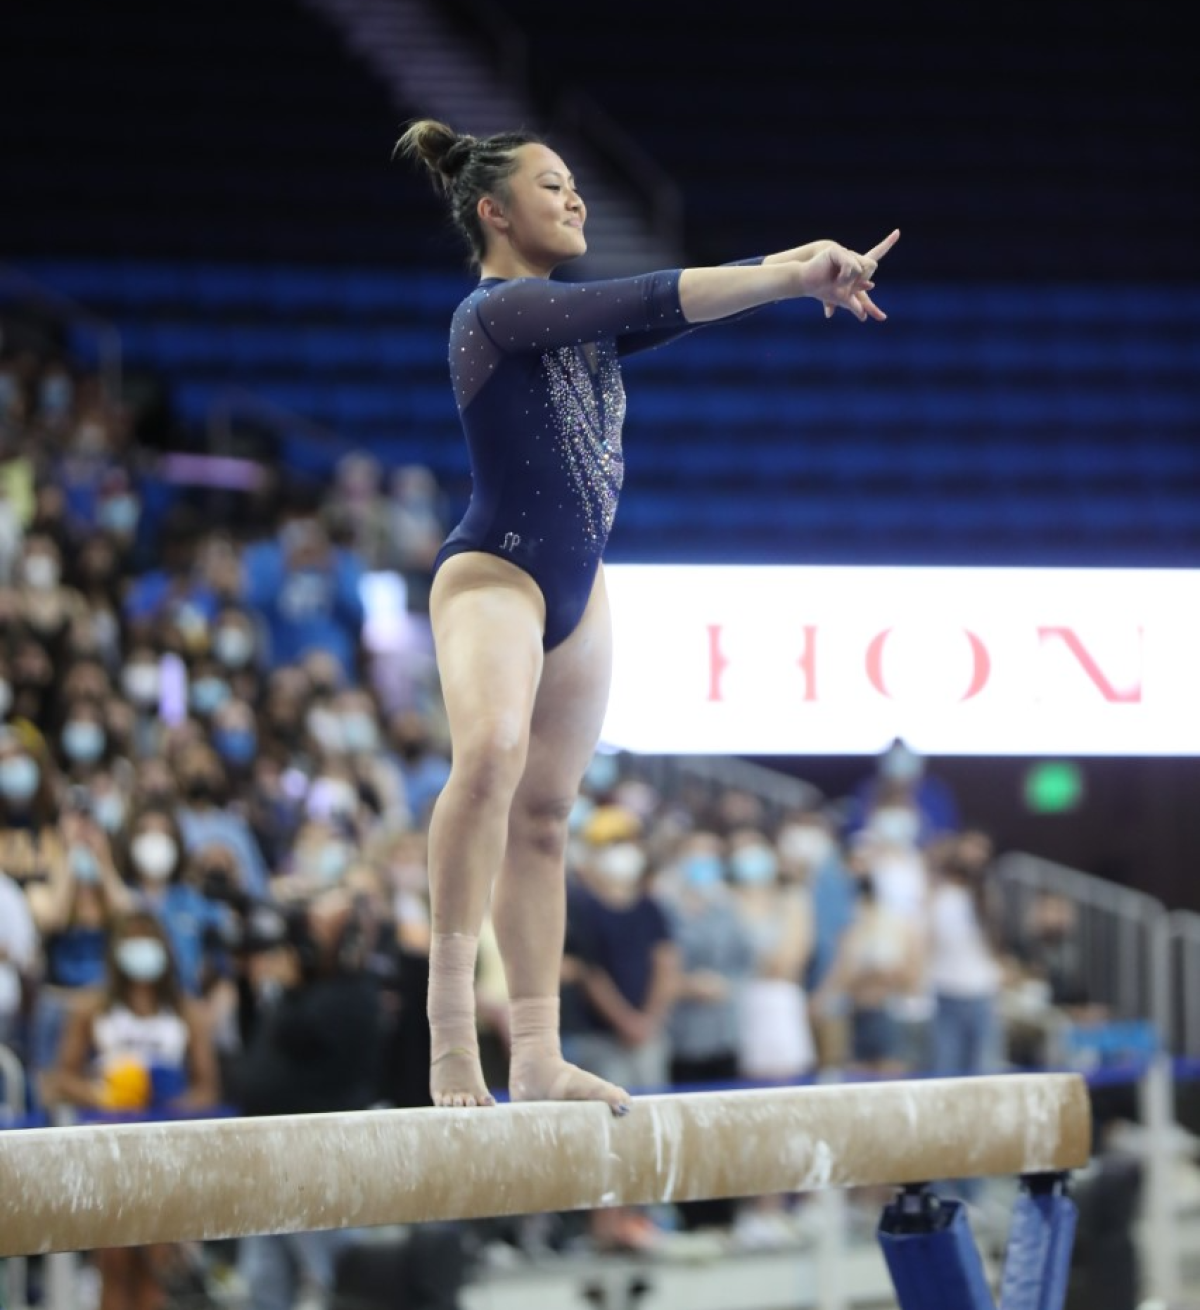 UCLA freshman Emma Malabuyo scored her first perfect 10 on the beam Saturday in the Bruins' victory over UC Davis.